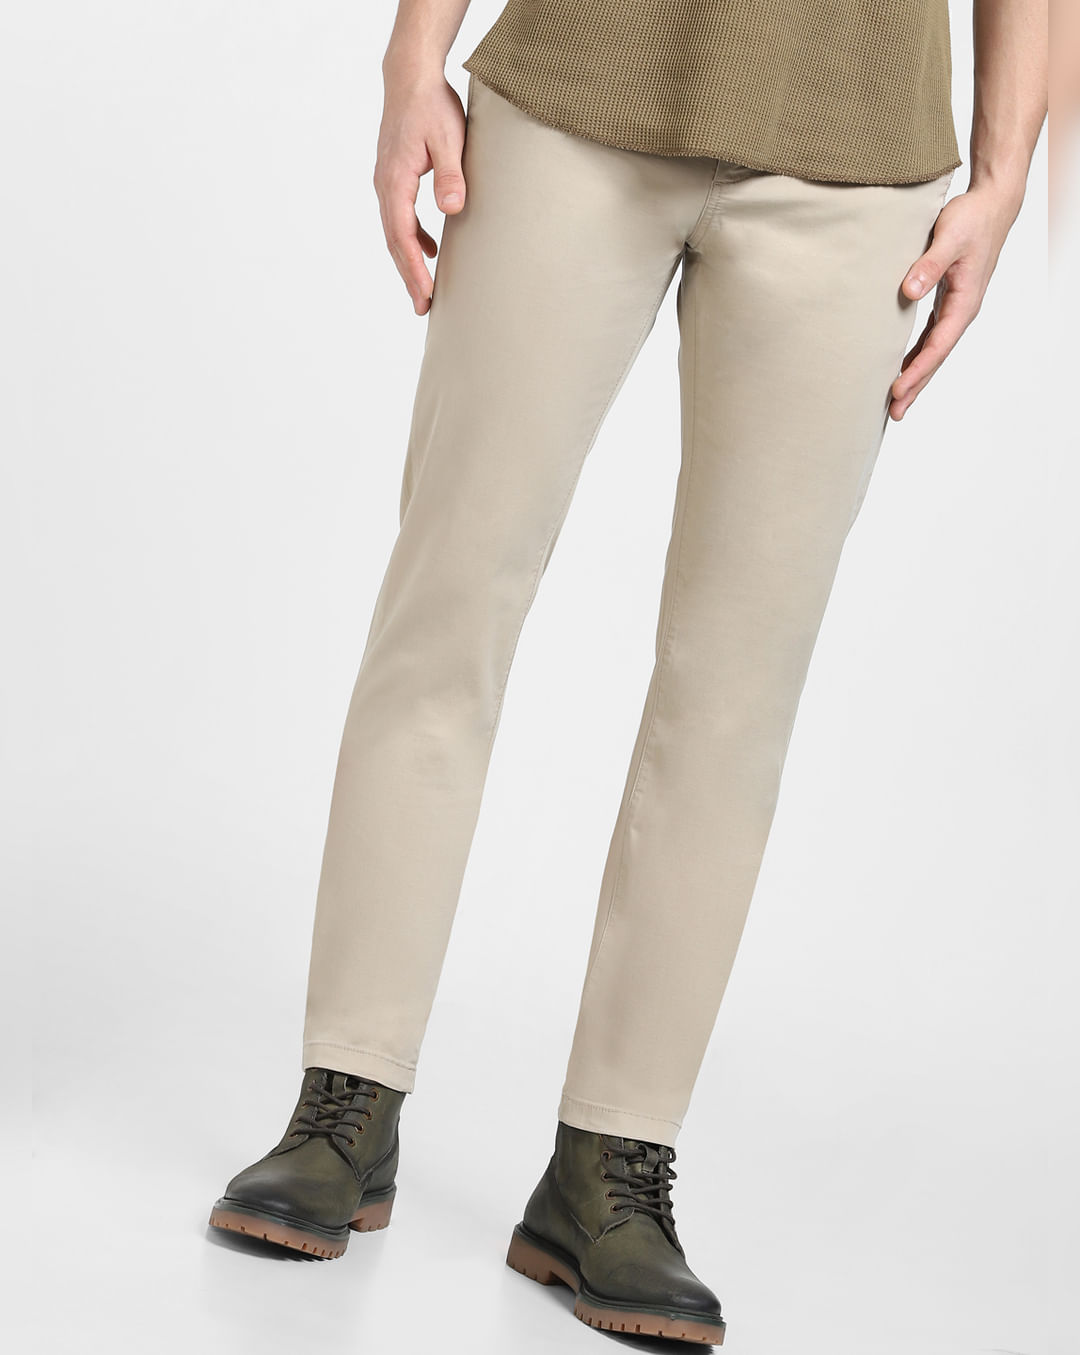 Khaki Dress Pants with White Crew-neck T-shirt Outfits For Men (41 ideas &  outfits)